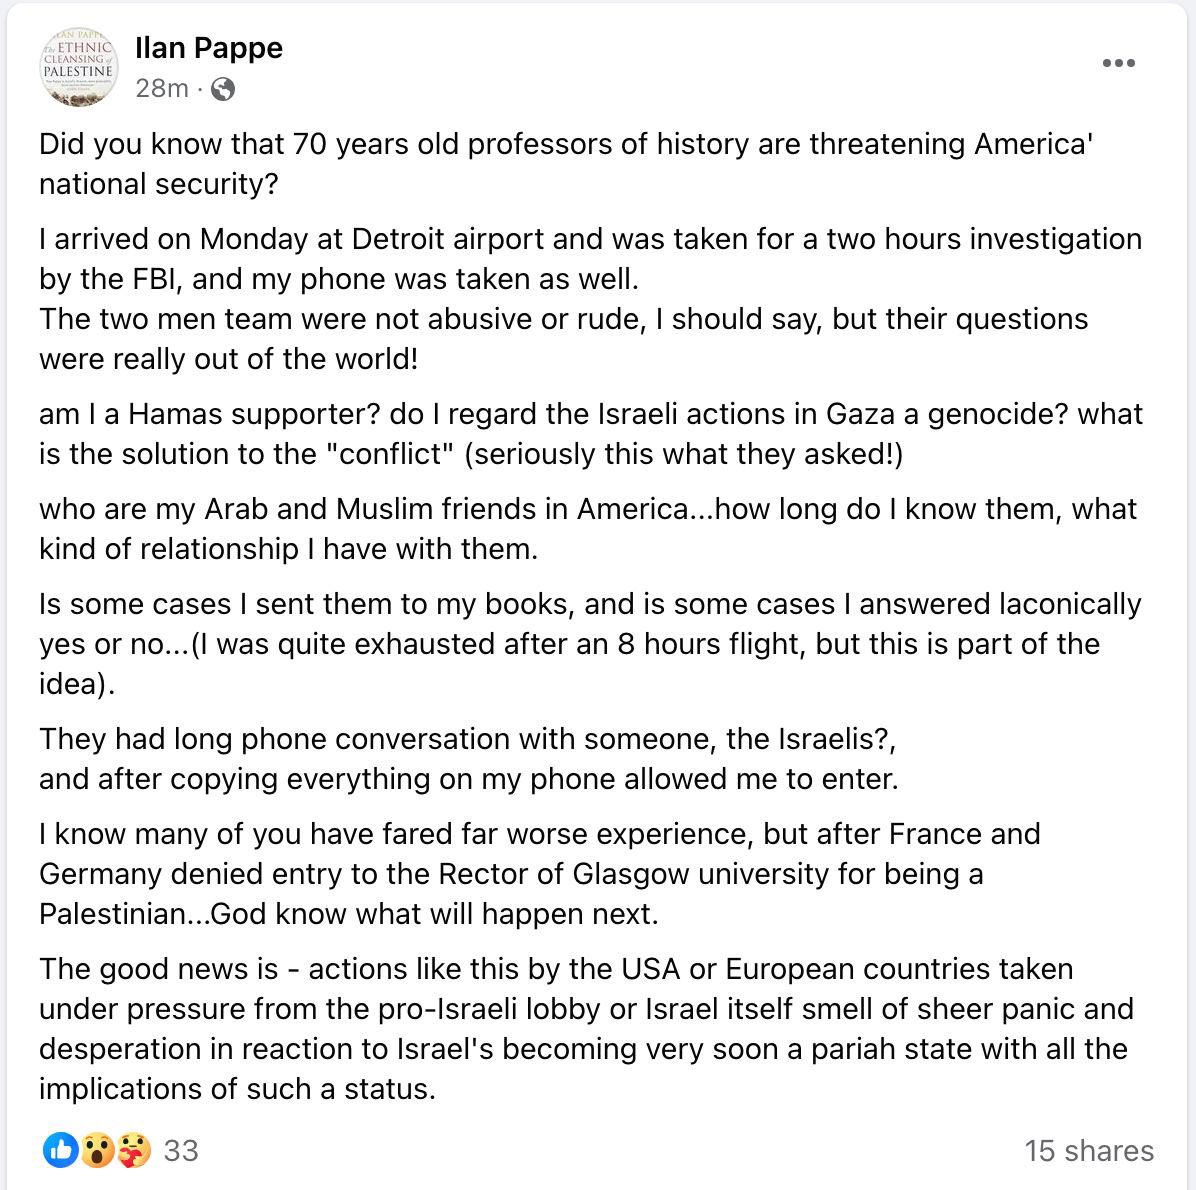 We've reached a whole new level of insanity and paranoia. Ilan Pappé, a 70 years old Jewish Israeli historian, was interrogated during 2 hours by the FBI at the airport in Detroit and asked if he was 'a Hamas supporter' 🤦‍♂️ His comment: 'actions like this smell of sheer panic